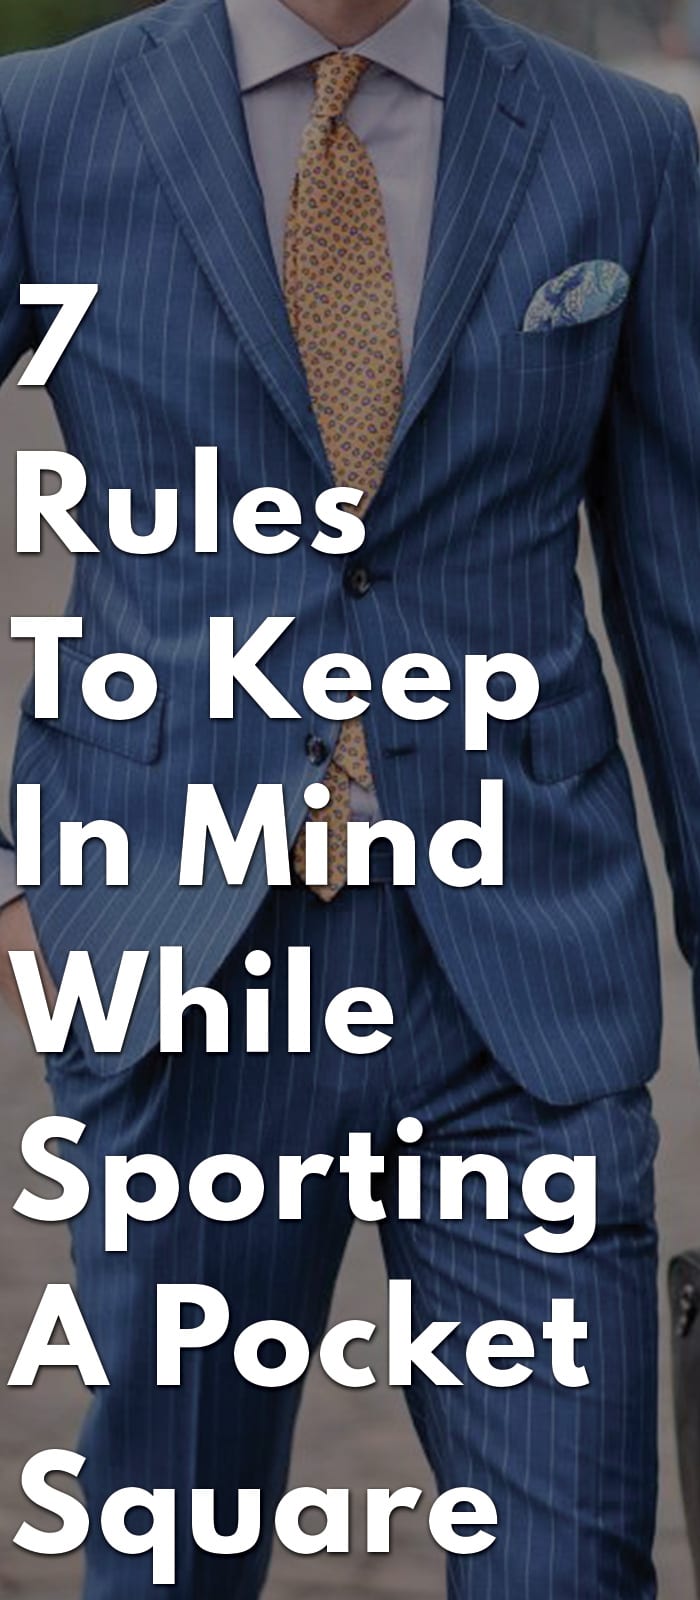 7-Rules-To-Keep-In-Mind-While-Sporting-A-Pocket-Square